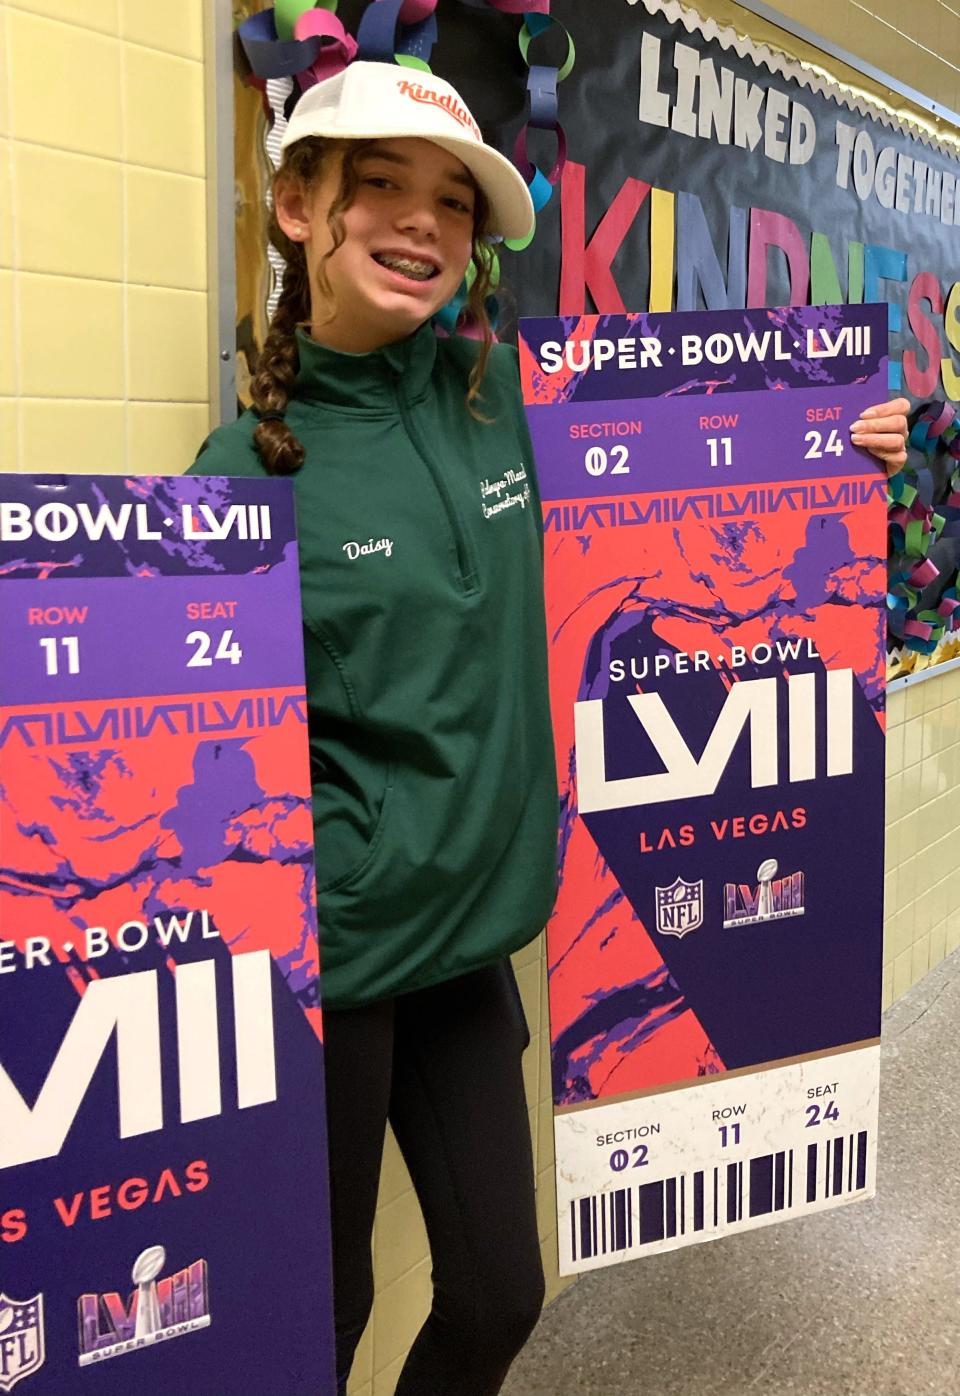 Daisy Jones, 13, holds the extra large Super Bowl tickets she won for her top video on kindness.